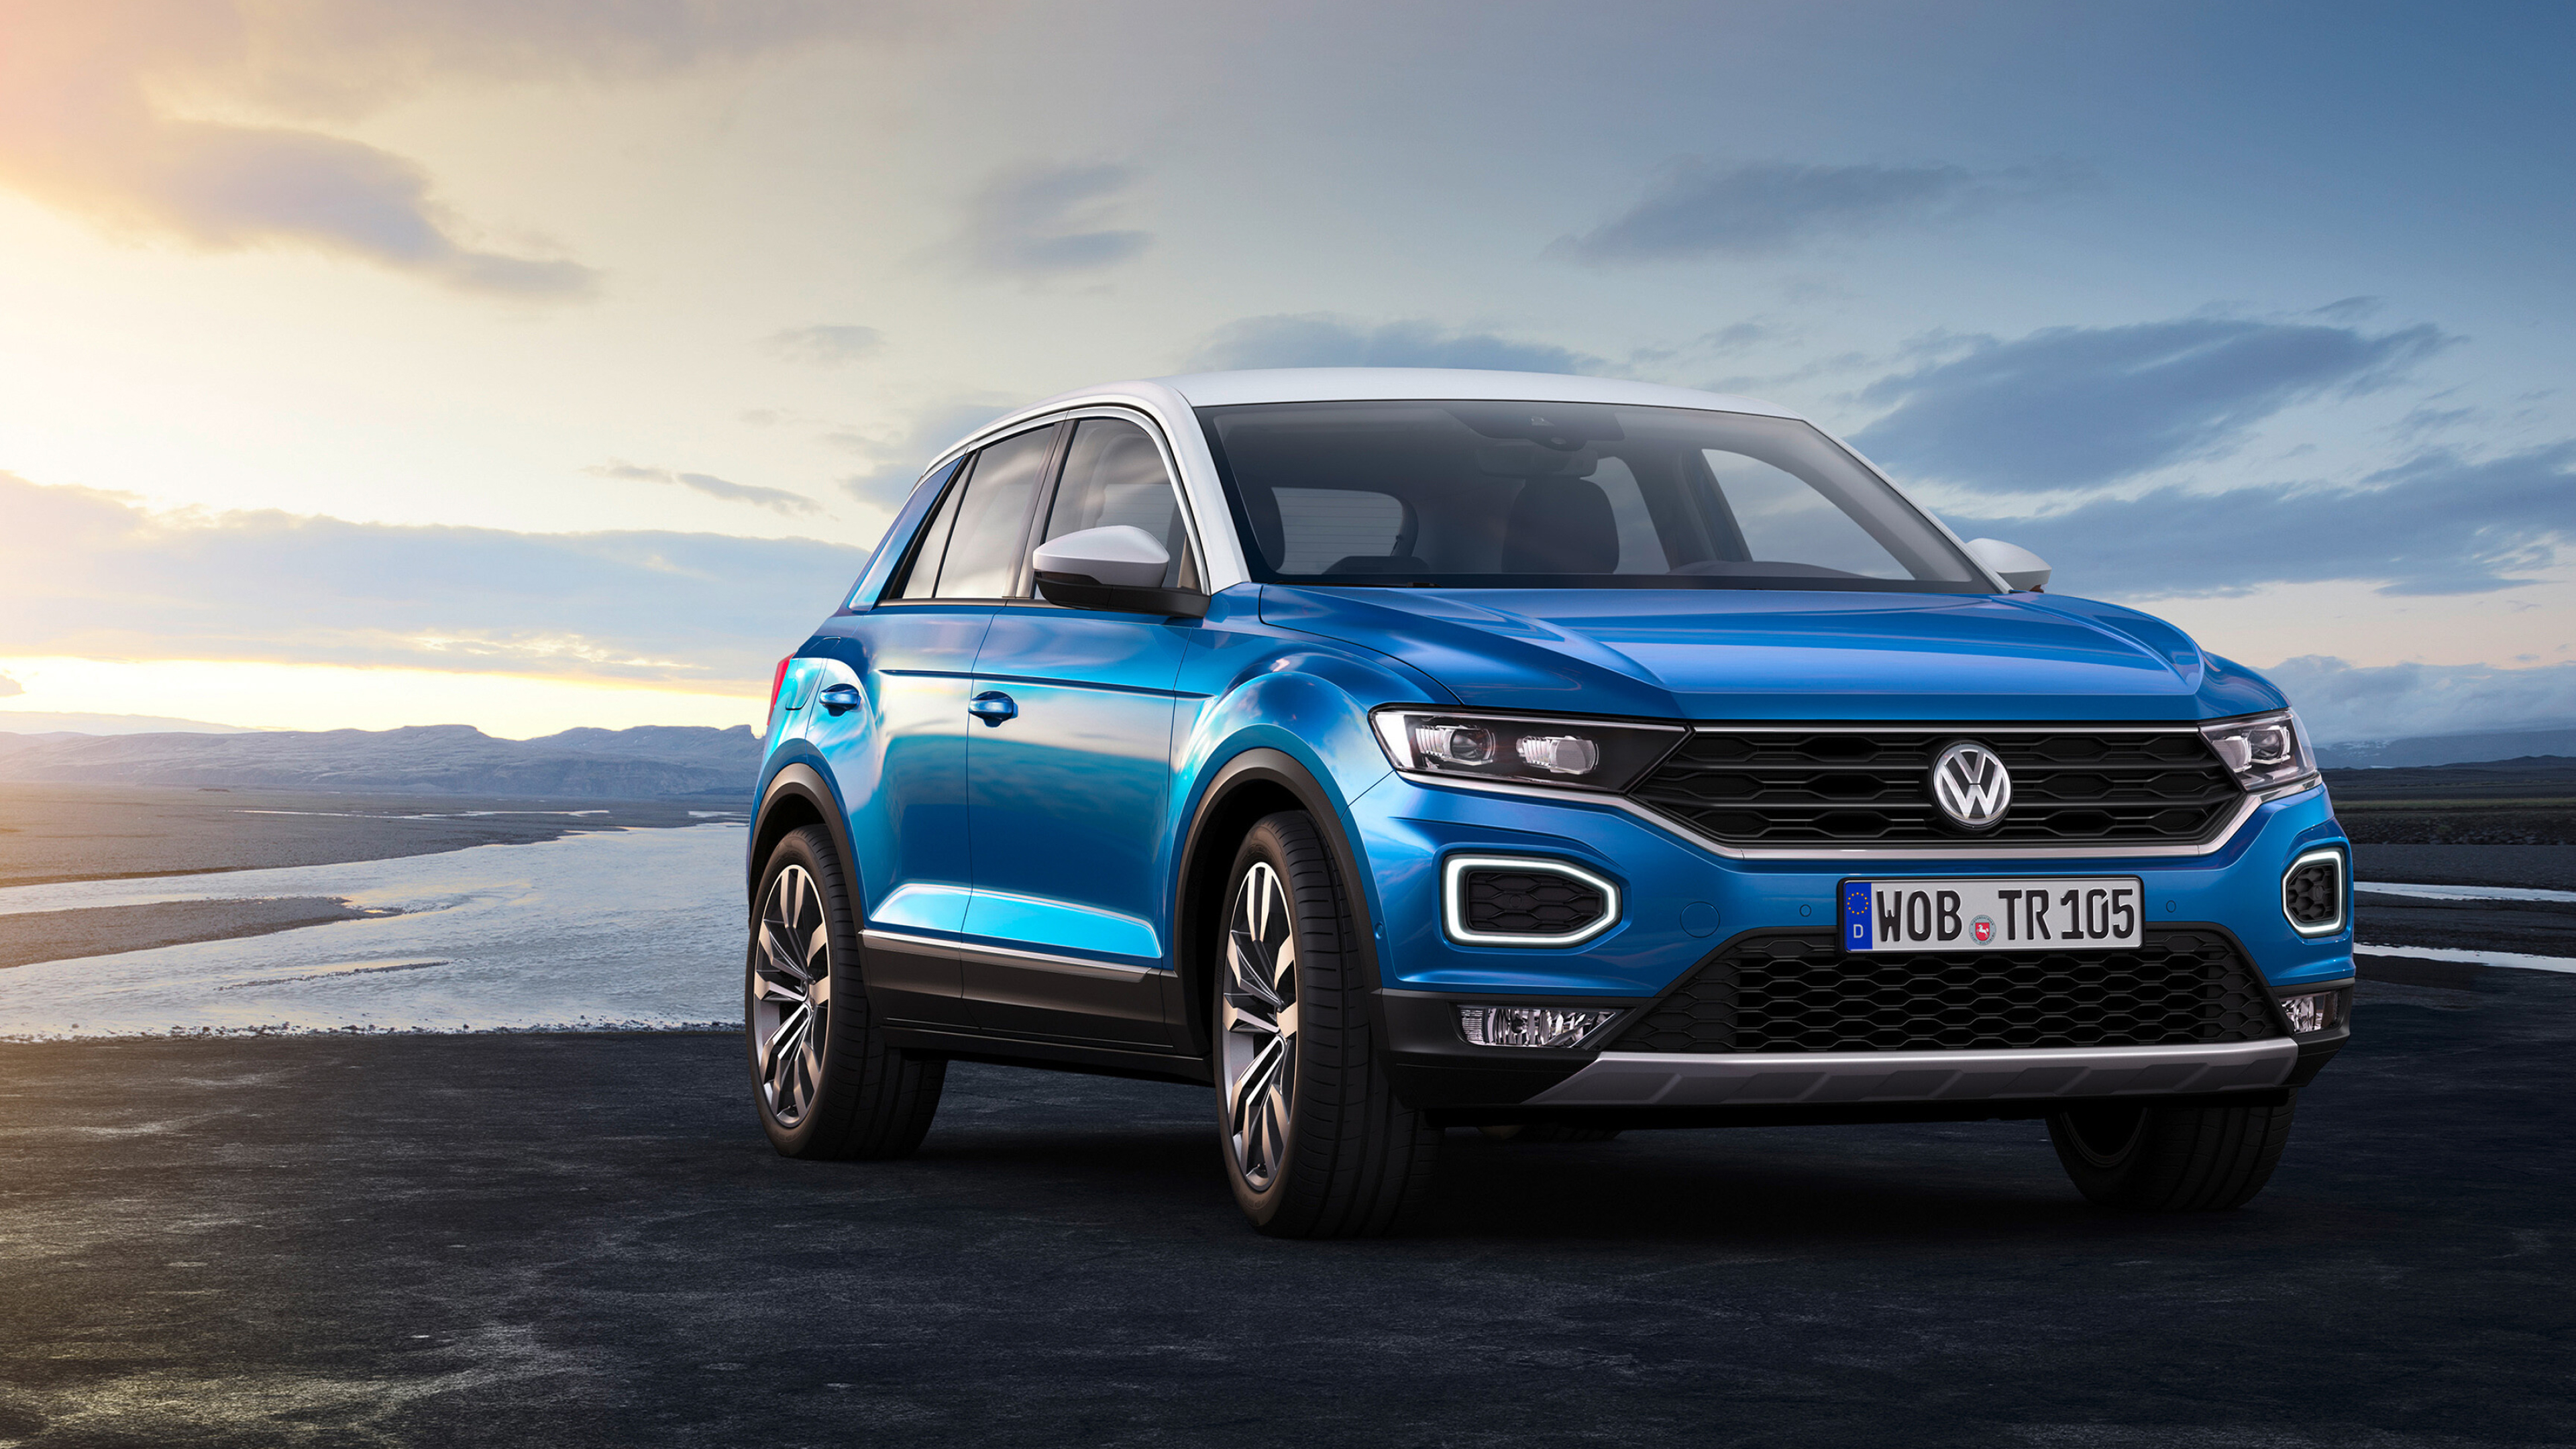 Volkswagen: VW T-Roc, A compact crossover SUV manufactured by German automaker since 2017. 3840x2160 4K Background.